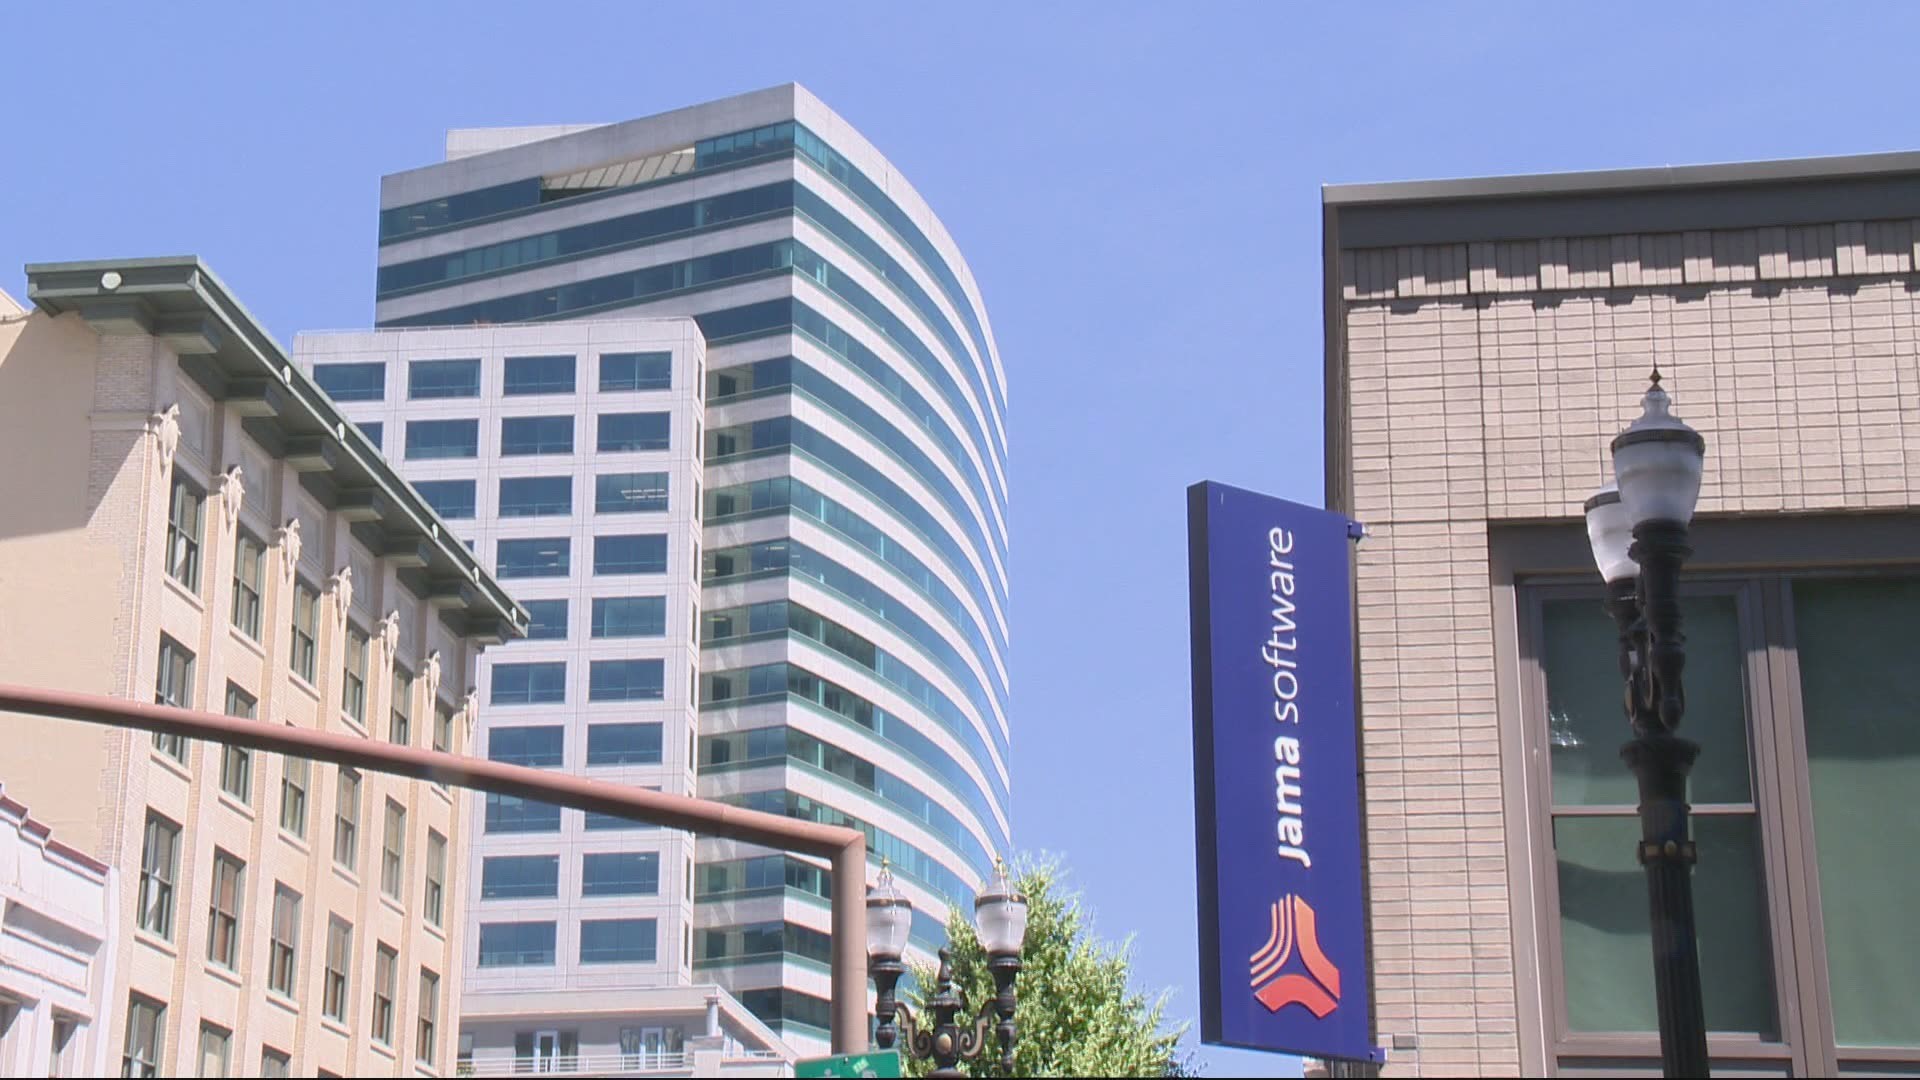 As COVID restrictions continue to loosen, dozens of government agencies in Portland are planning to bring employees back to work. Morgan Romero has the update.